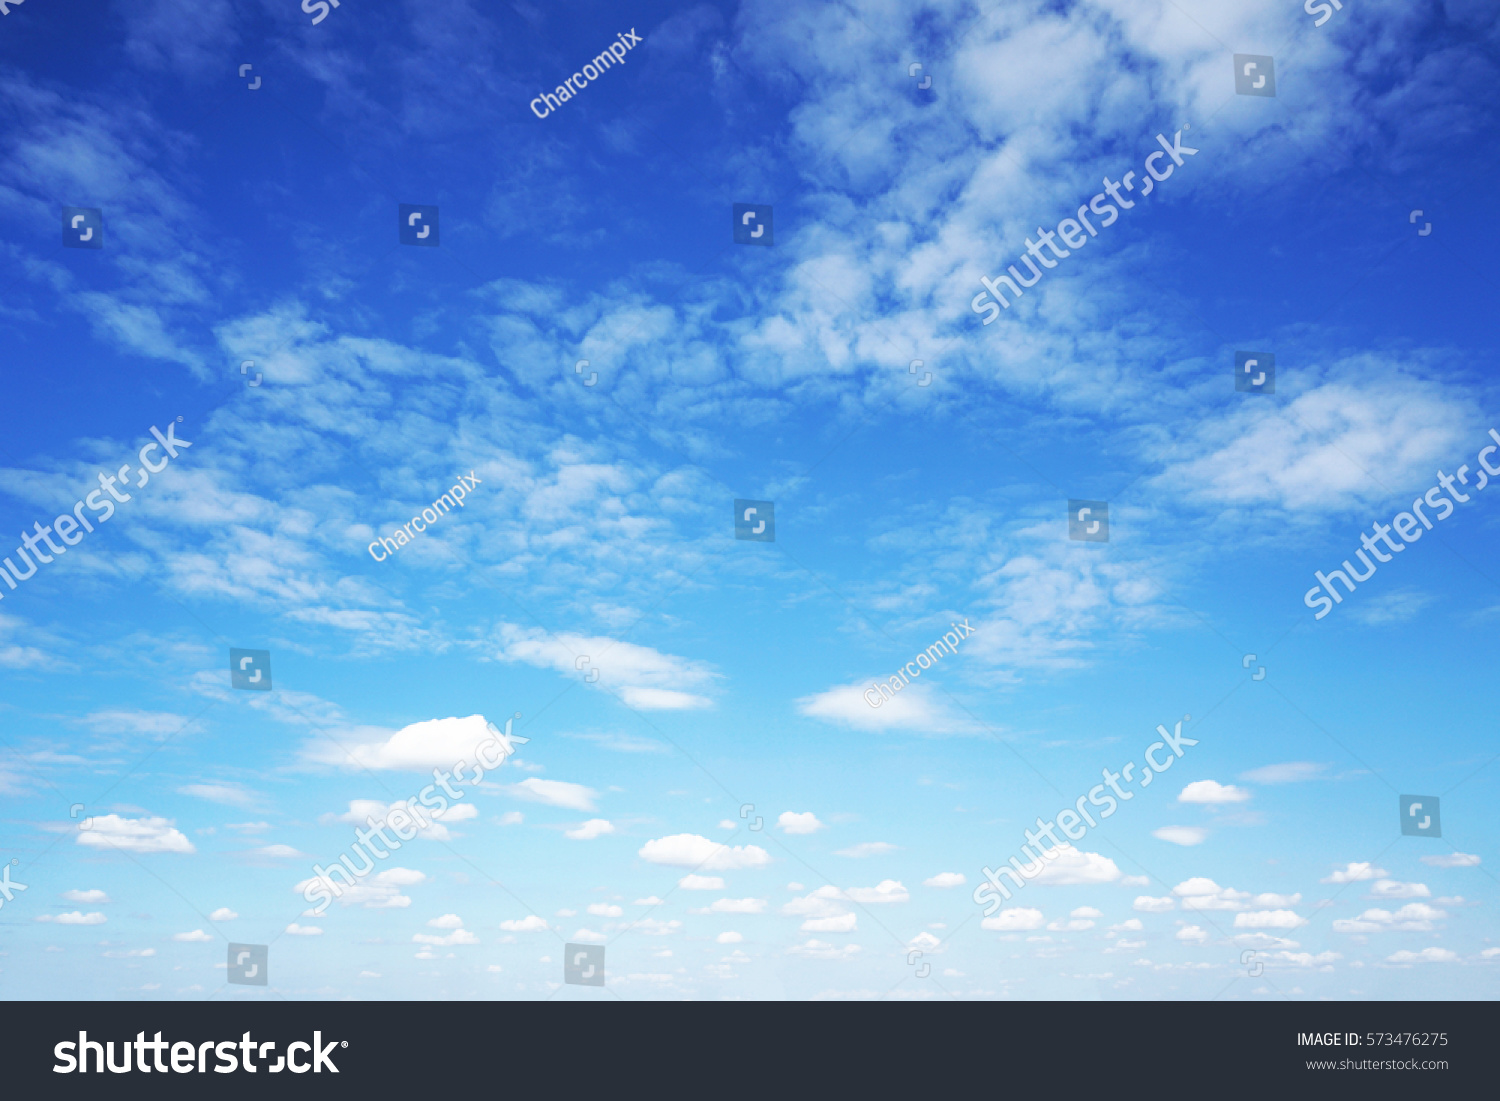 Sunshine clouds sky during morning background. Blue,white pastel heaven,soft focus lens flare sunlight. Abstract blurred cyan gradient of peaceful nature. Open view out windows beautiful summer spring #573476275